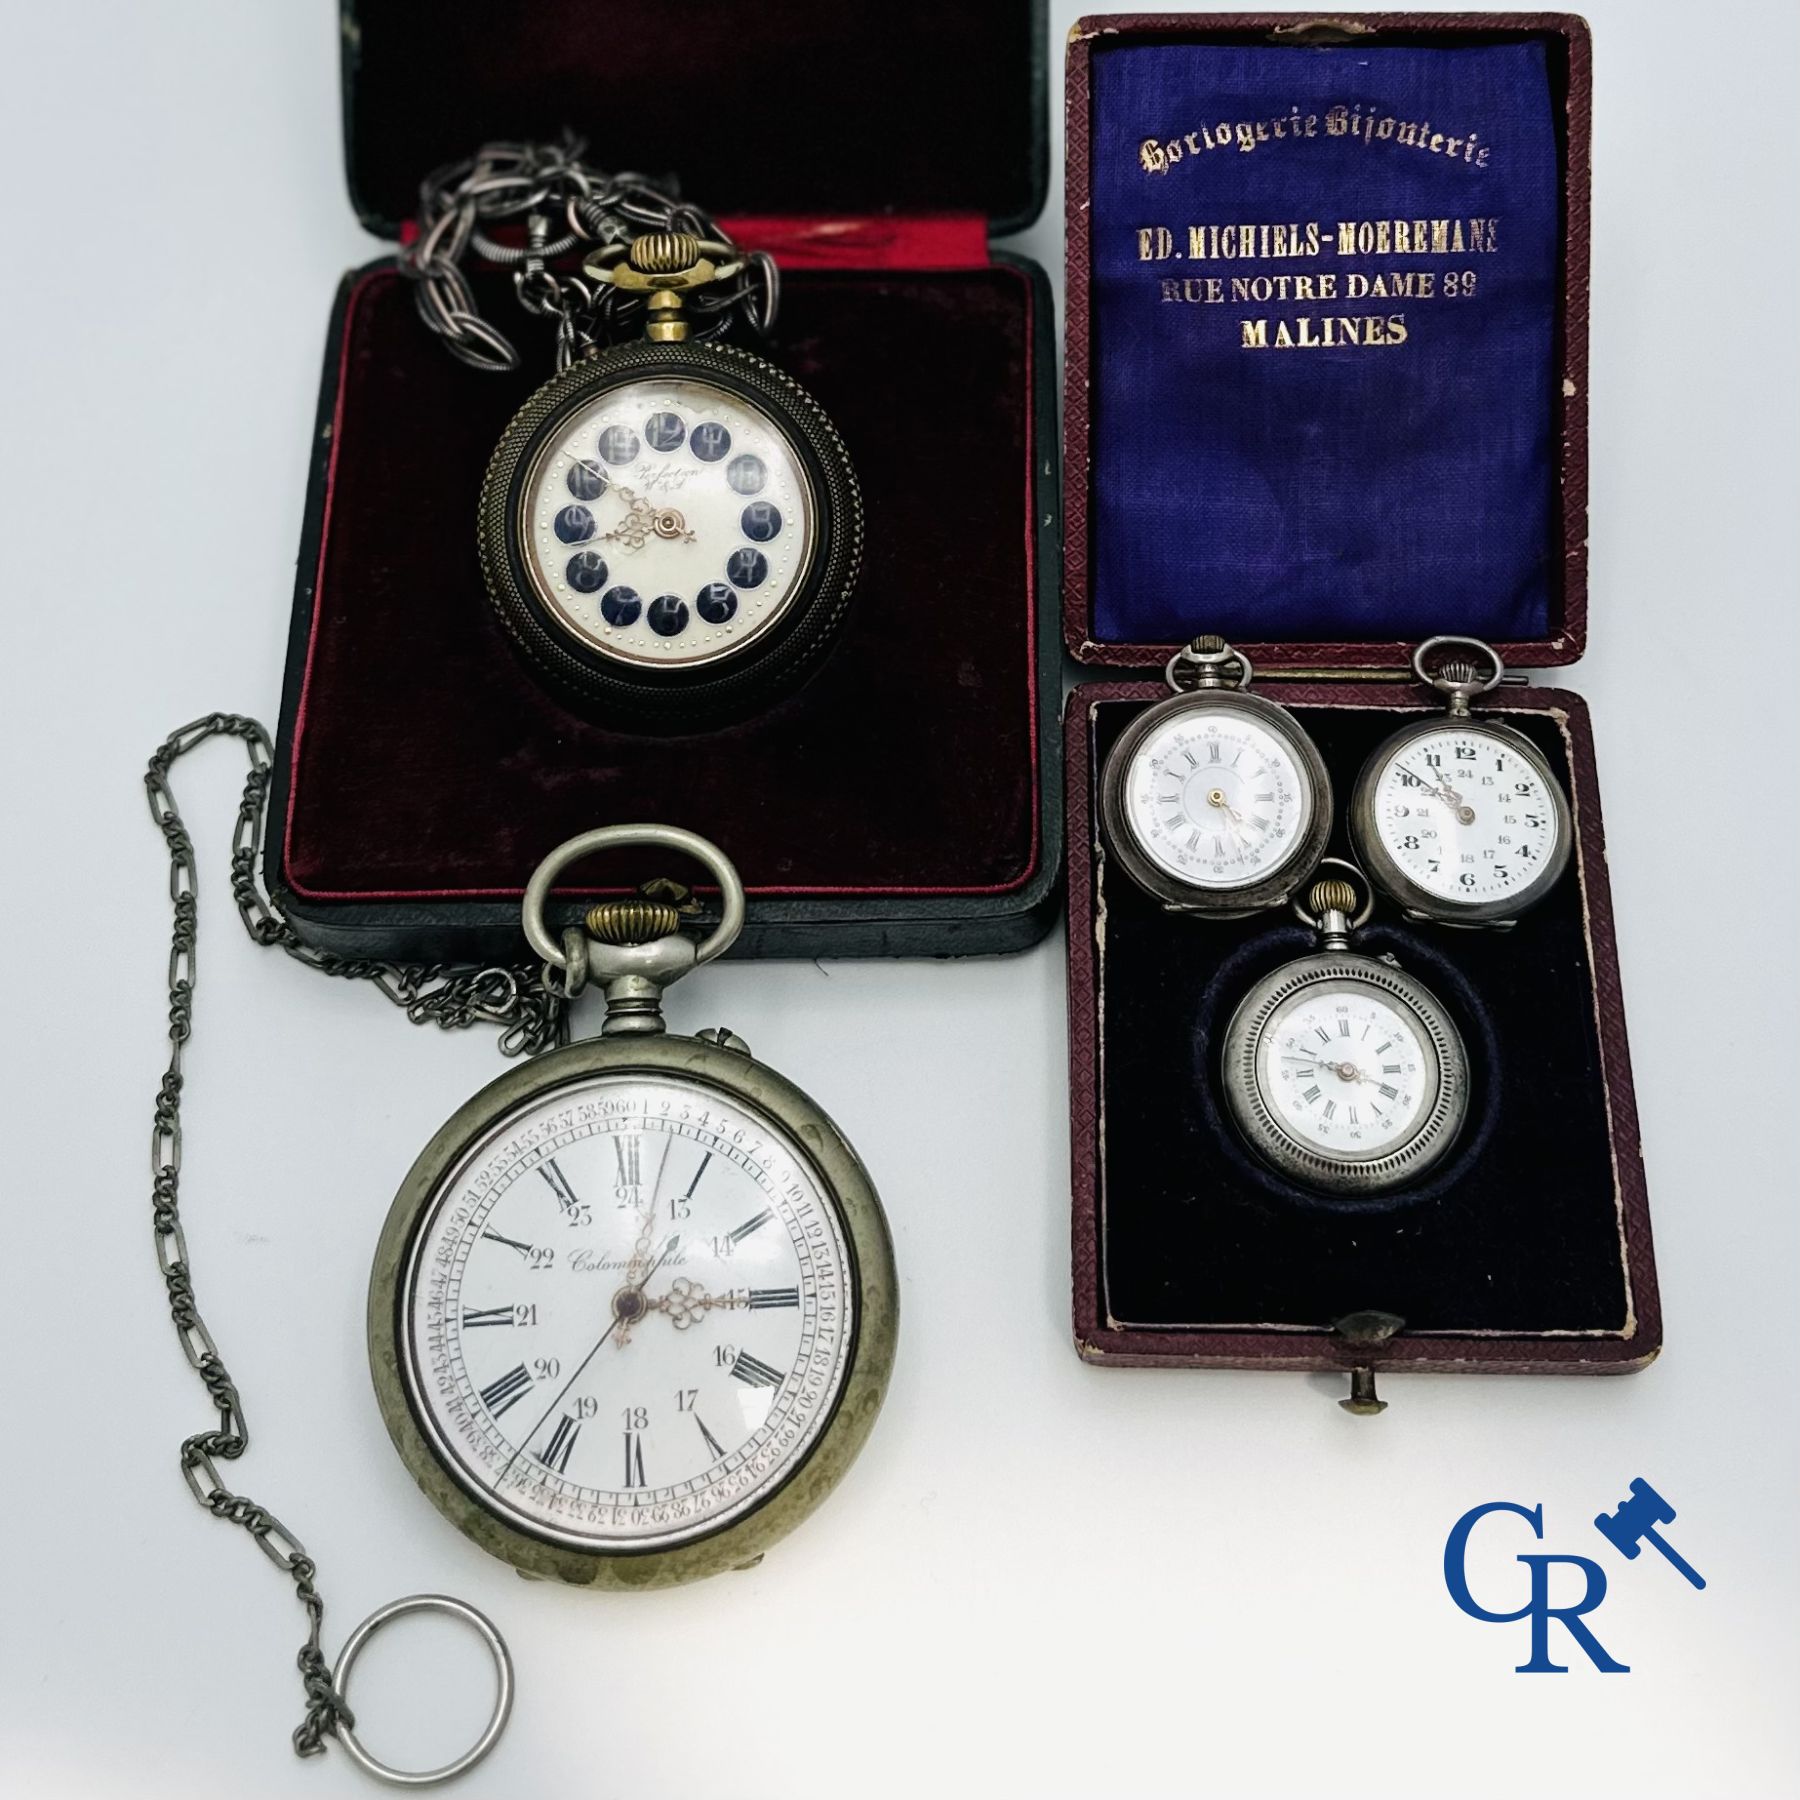 Jewellery-watches: Lot consisting of 2 large men's pocket watches and 3 women's watches.